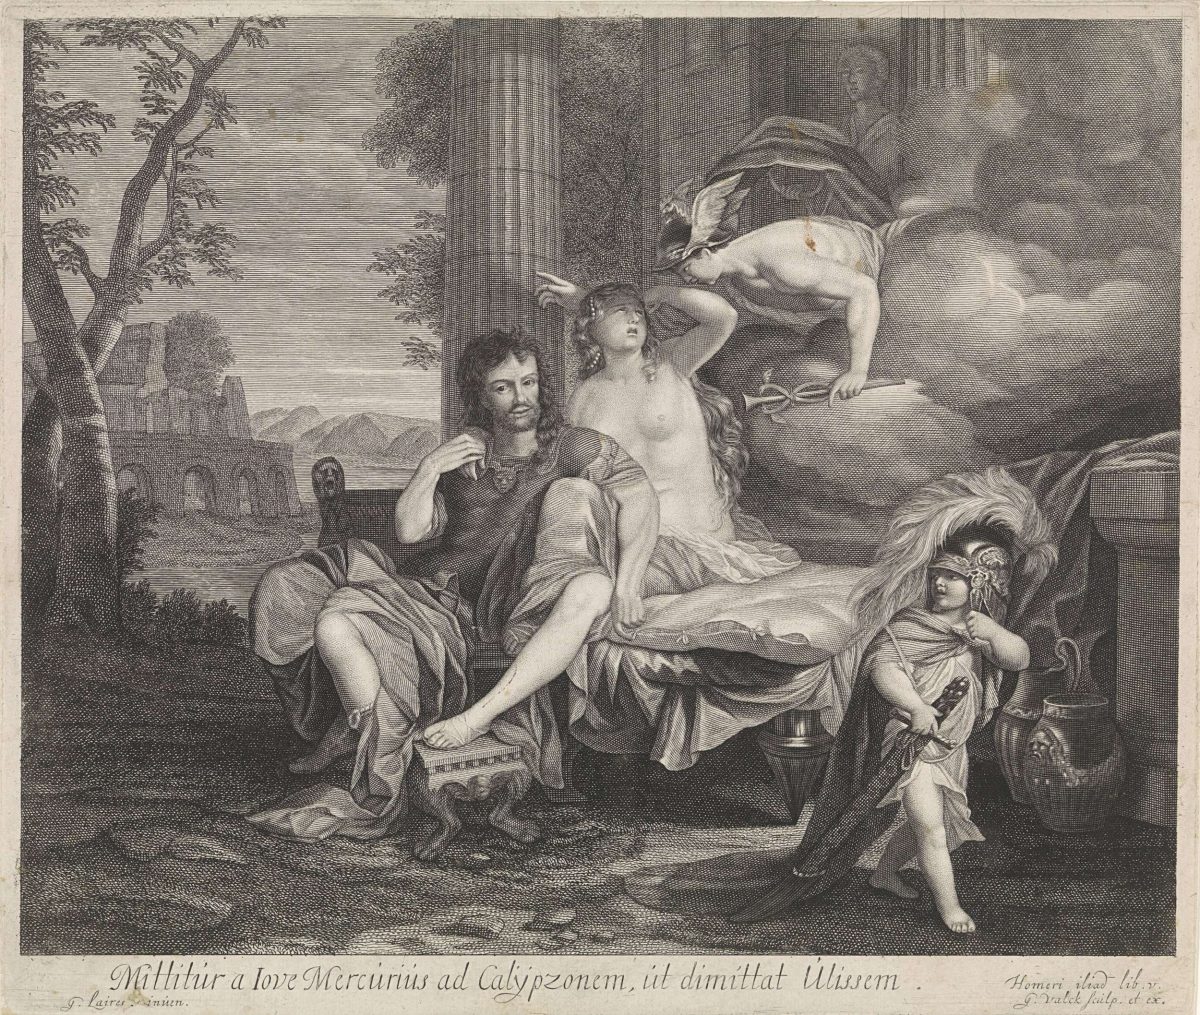 An engraving  by Gerard de Lairesse in which Hermes appears and demands that the goddess Calypso lets Odyesseus go. (Public Domain)